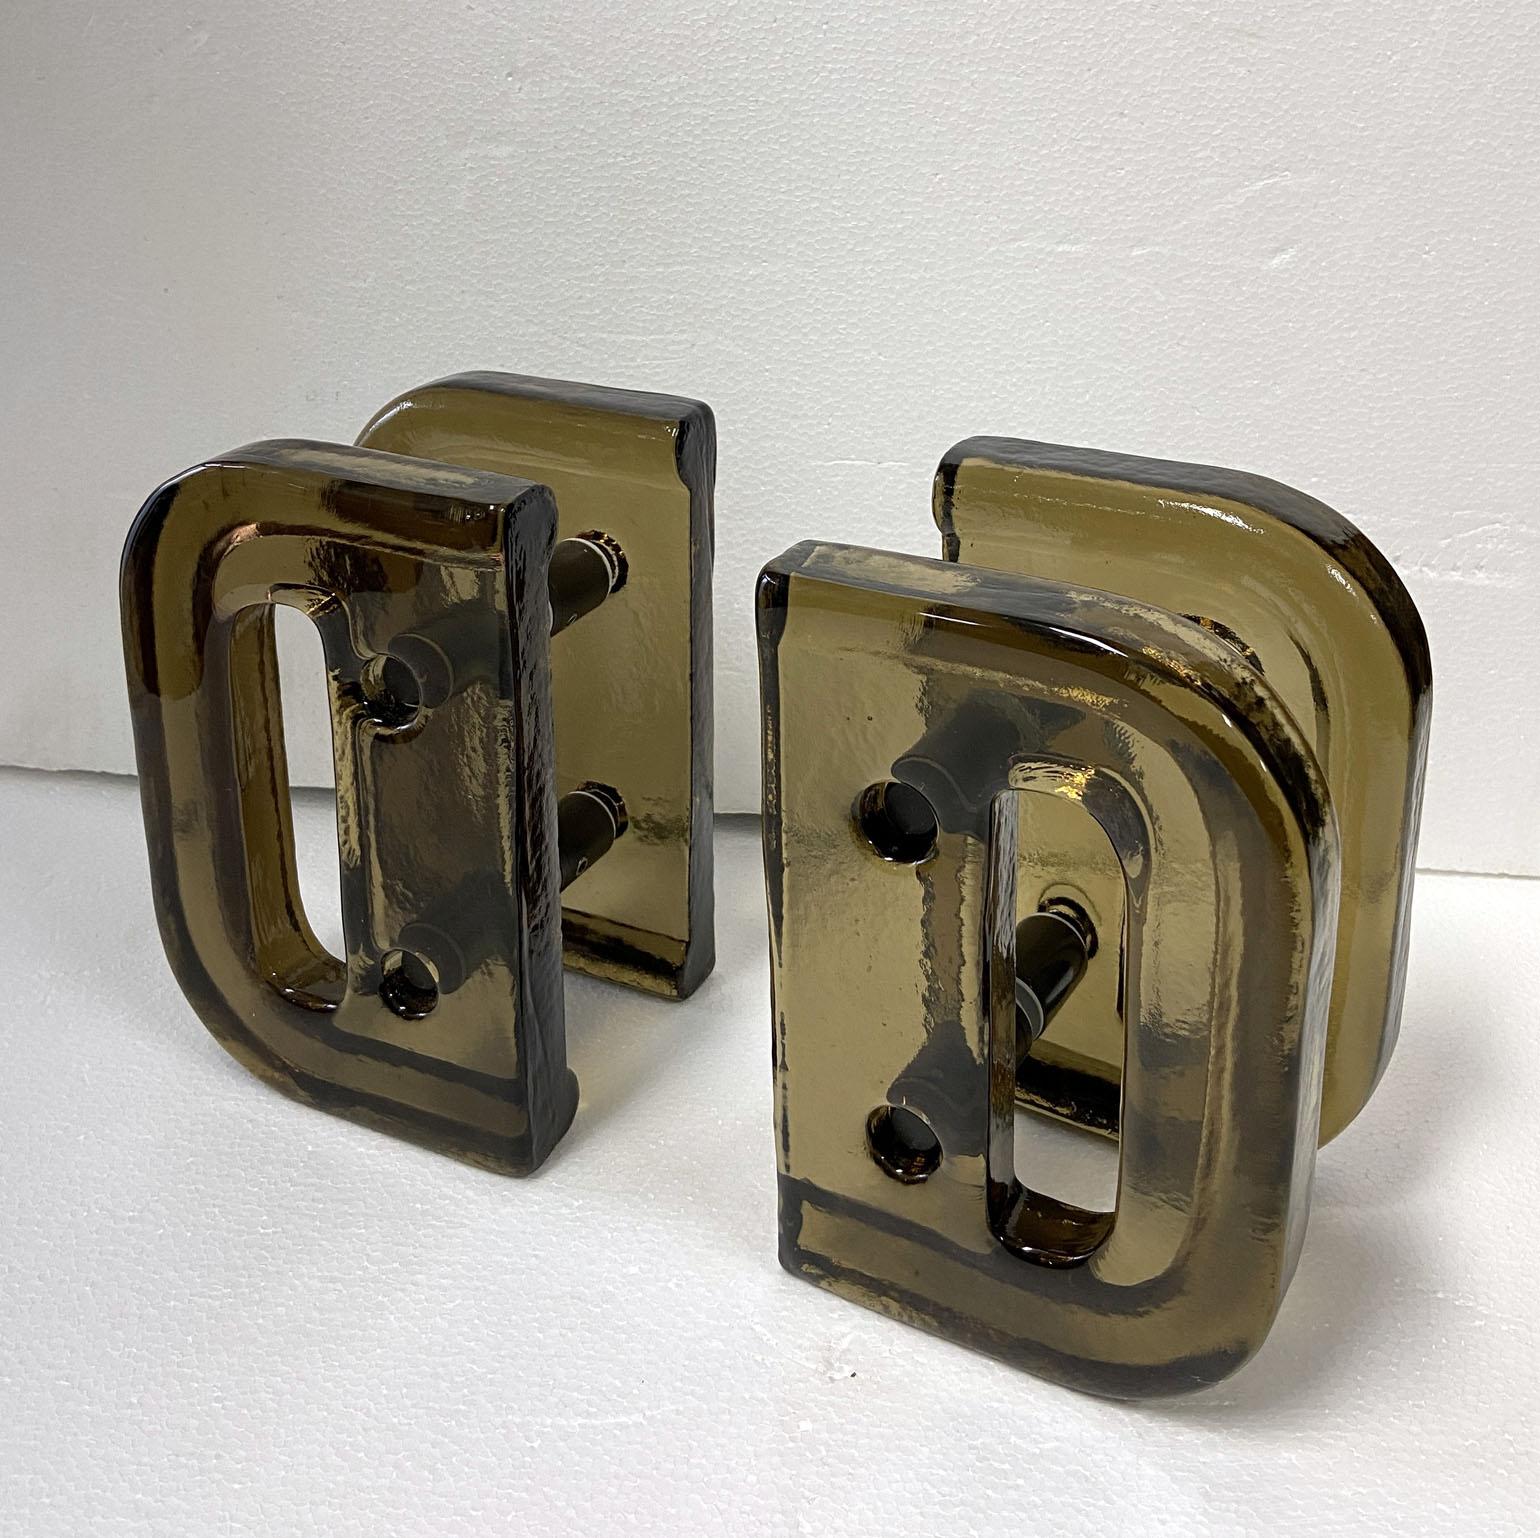 A pair of double door handles, push and pull, rectangular vibrant red cast glass with chrome fittings designed for a glass or wooden doors but suitable for any kind of doors. The glass slabs are cast by directing molten glass into a mould where it